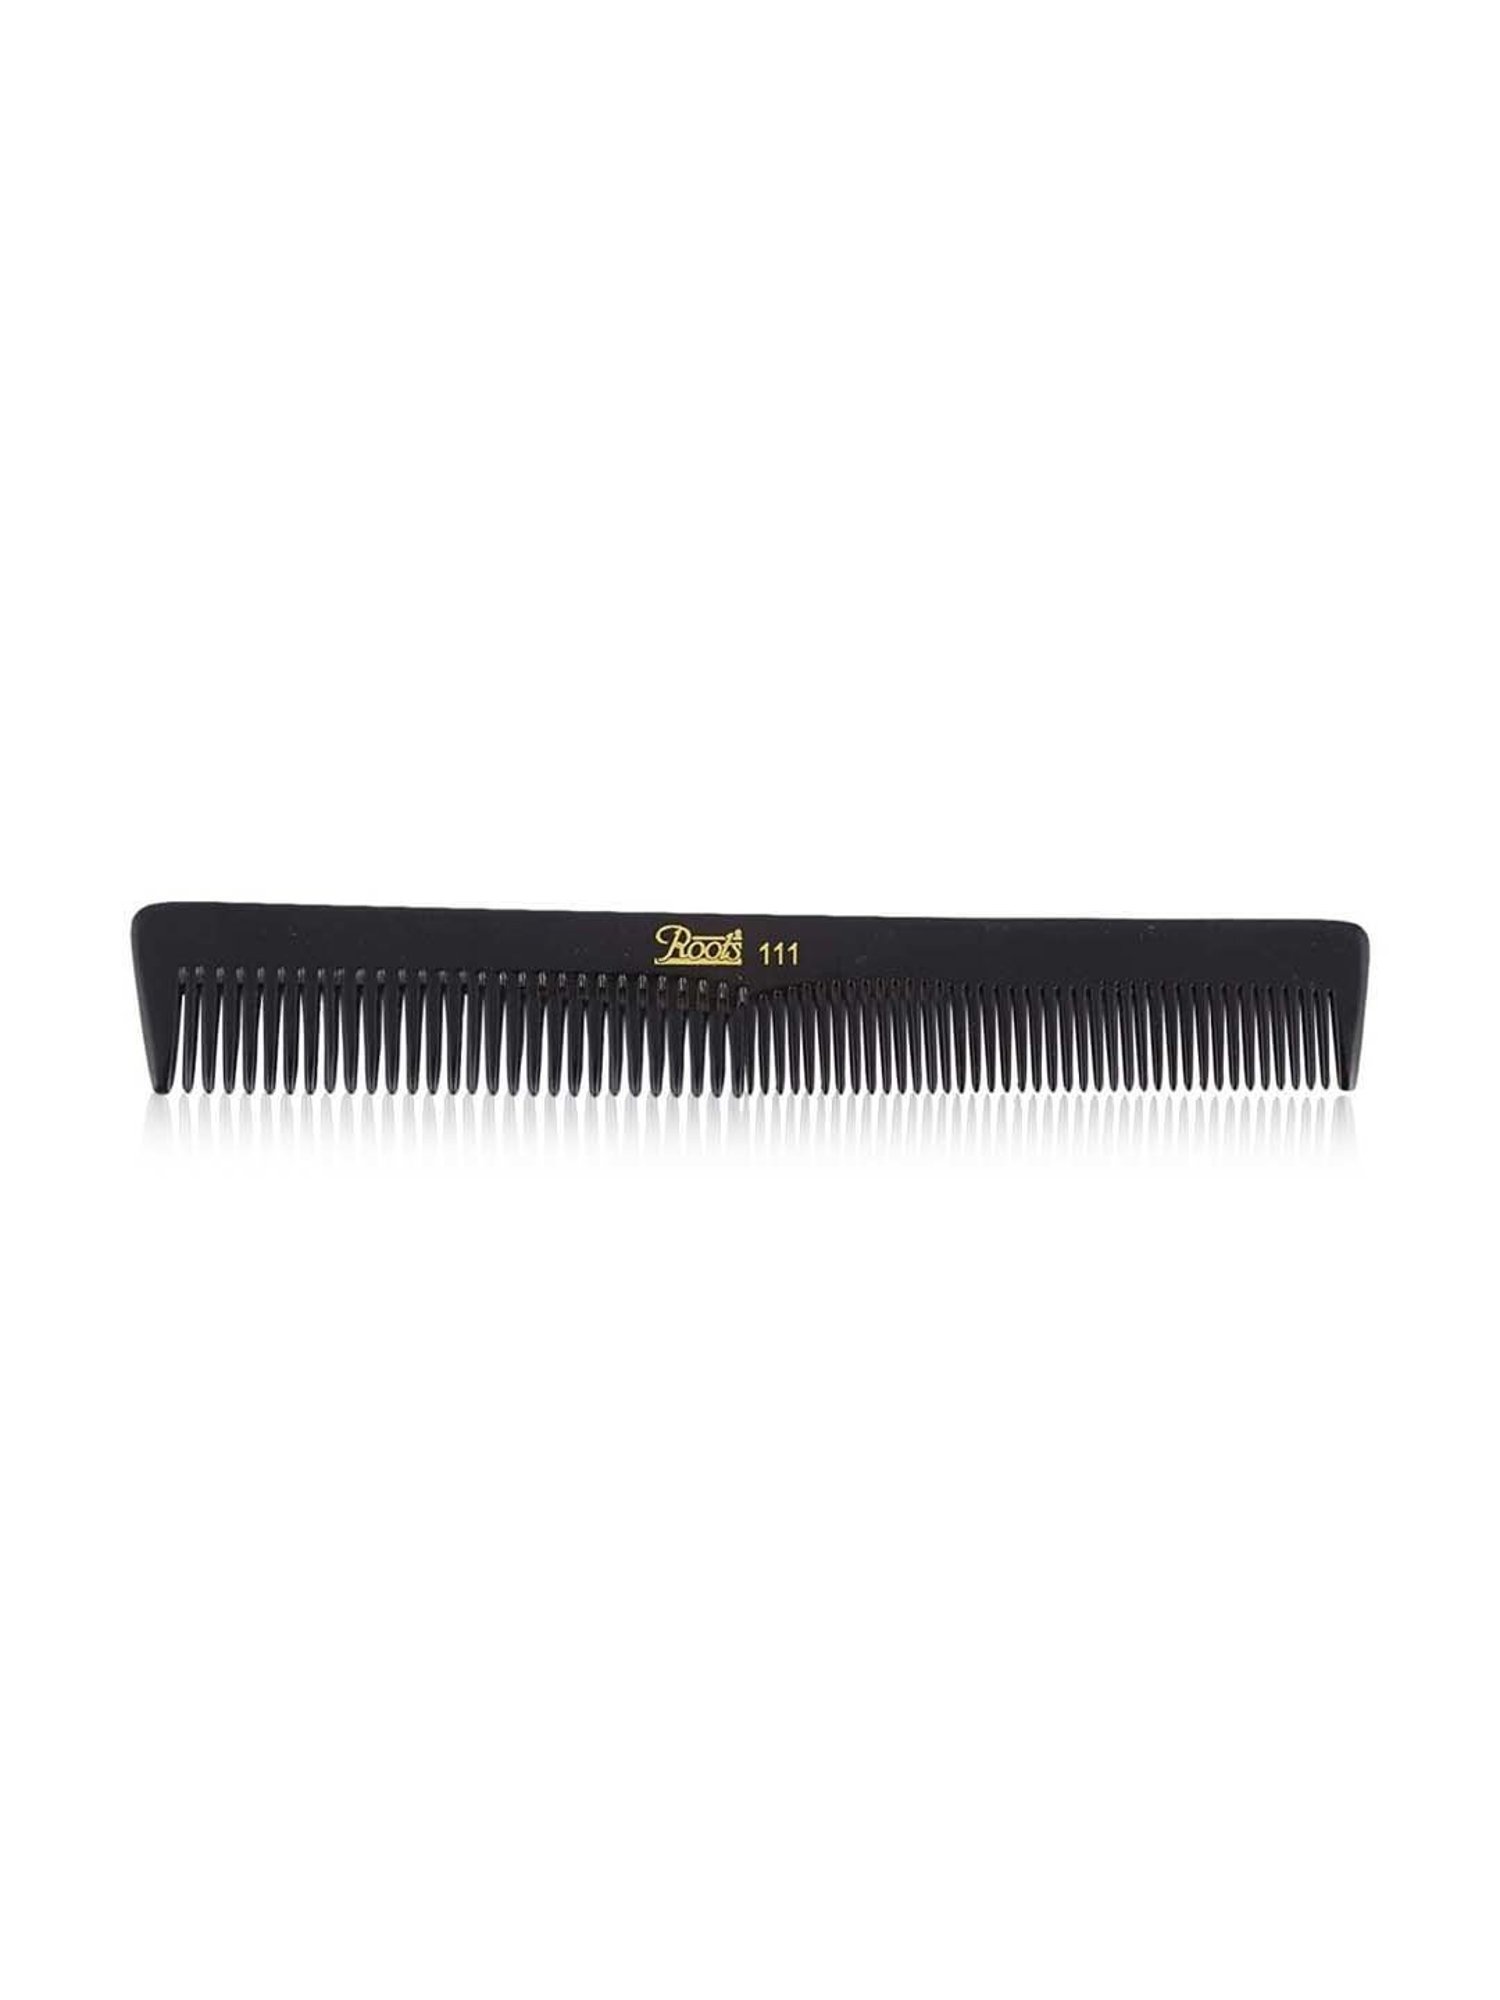 The RootComb